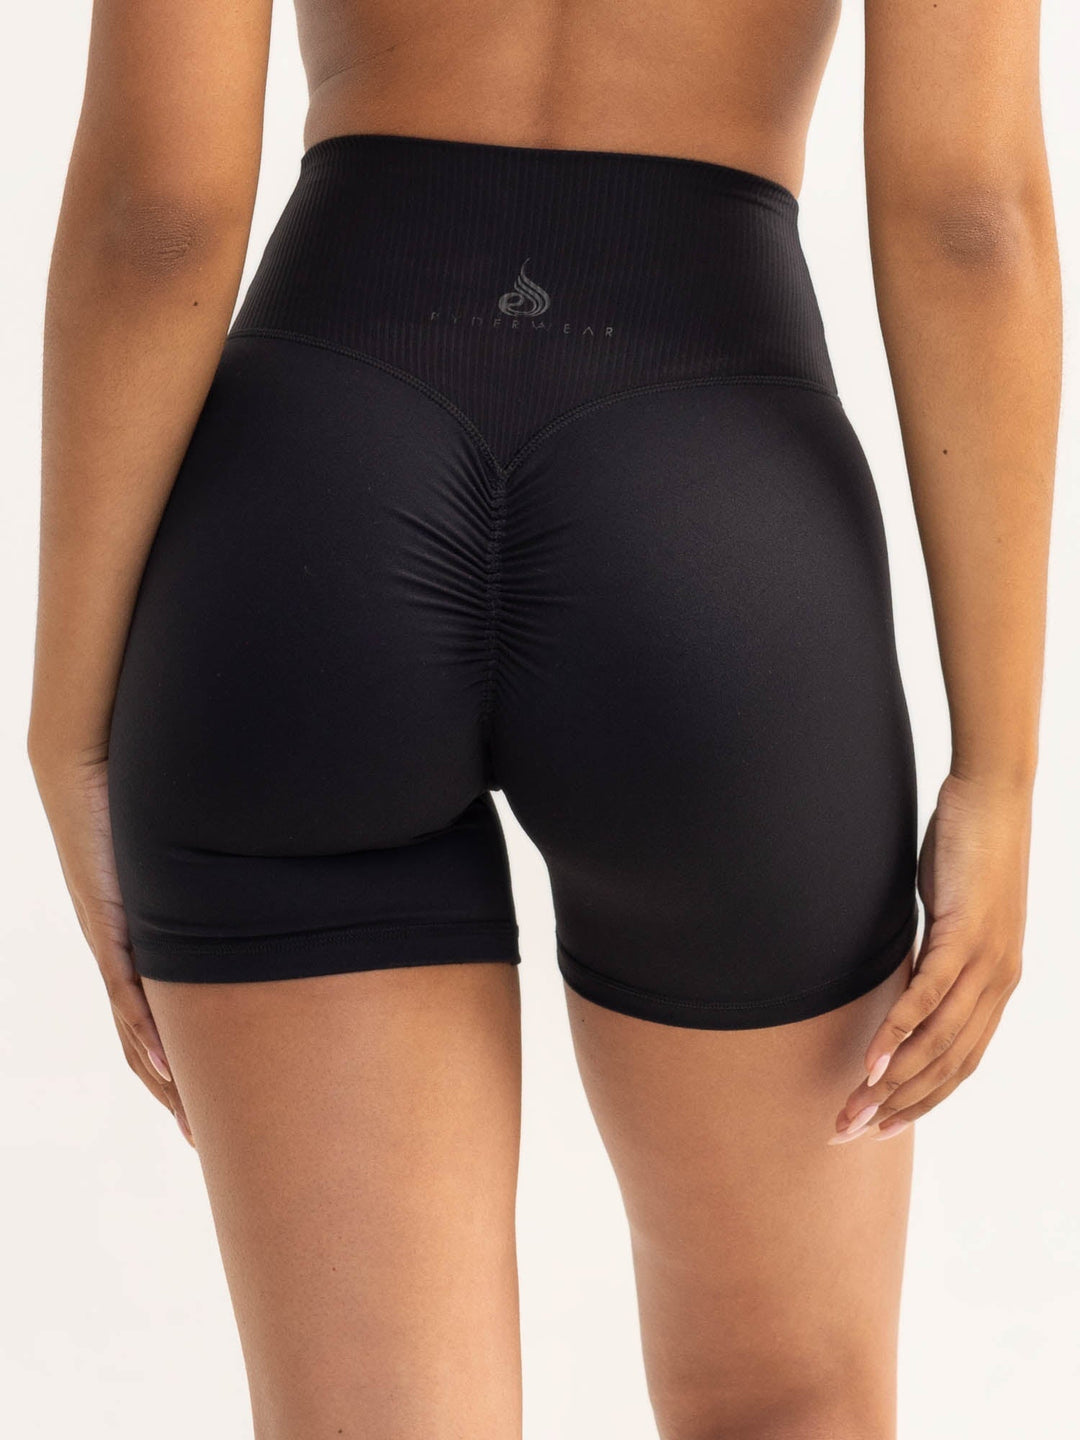 Activate Cross Over Scrunch Shorts - Black Clothing Ryderwear 